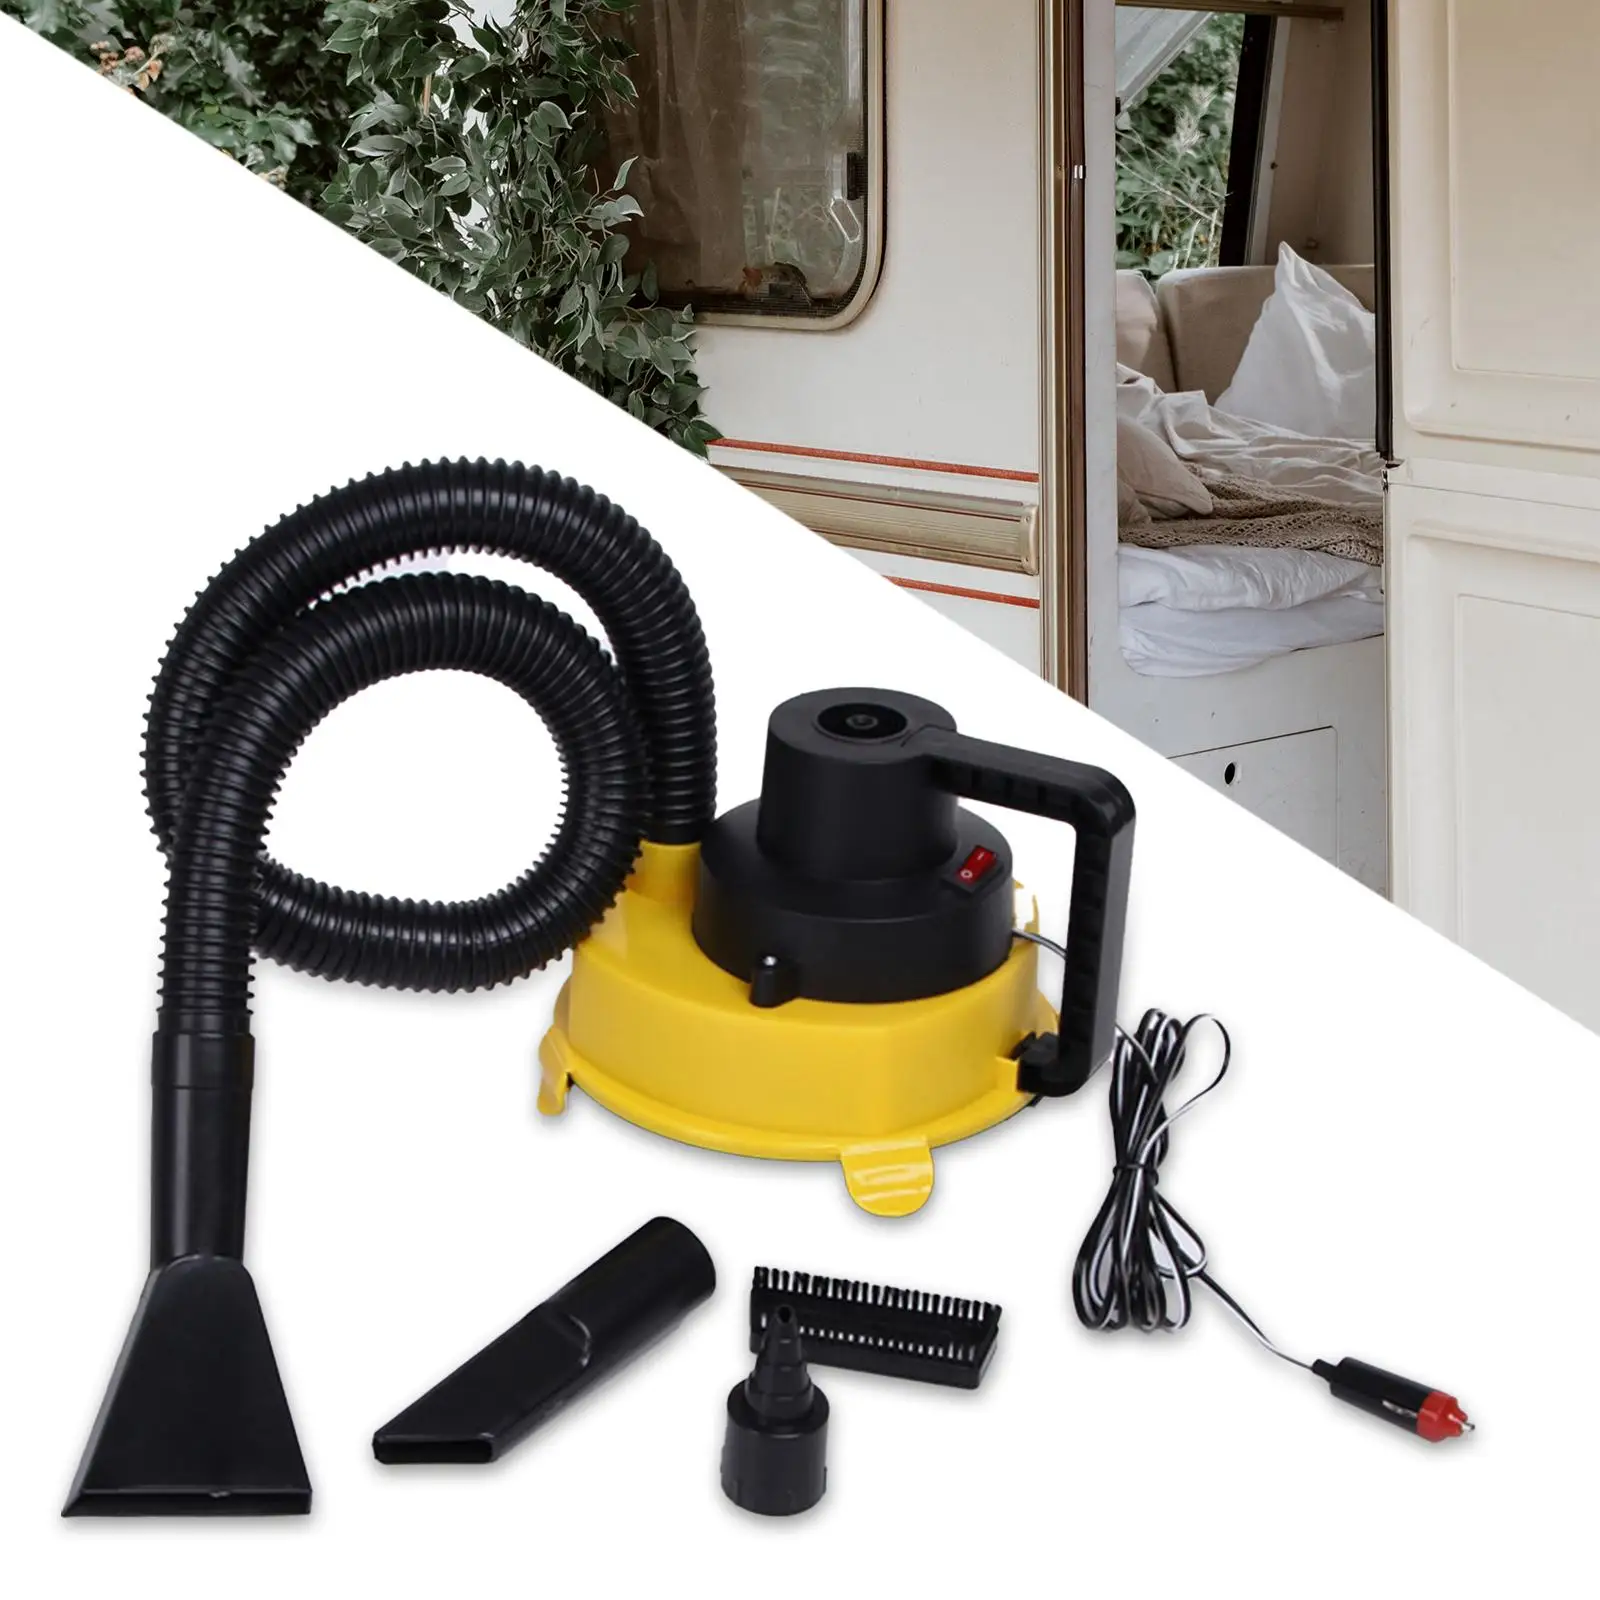 Car Vacuum Cleaner Quick Cleaning Portable Vacuum Cleaner Home Car Dual Use 12V Handheld Duster for Camper RV Vehicle Boat